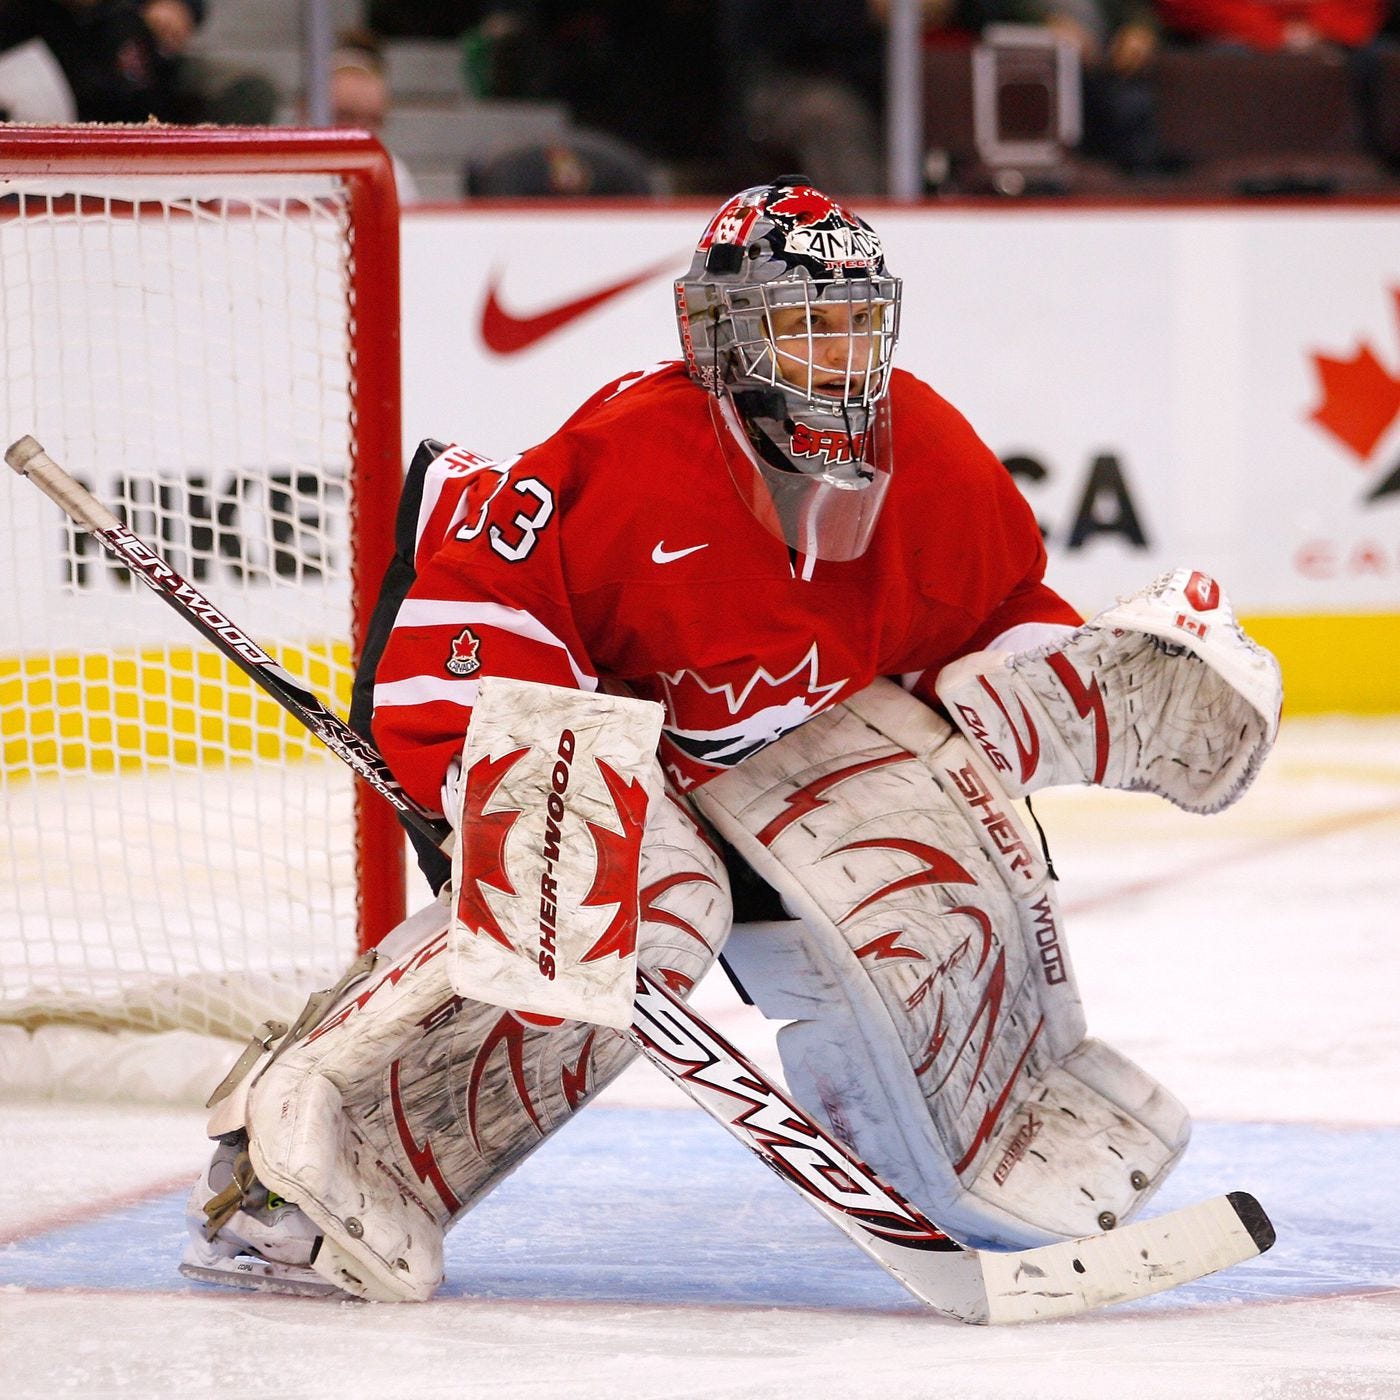 Bring Back the Stand-Up Goalies - by Stan Fischler